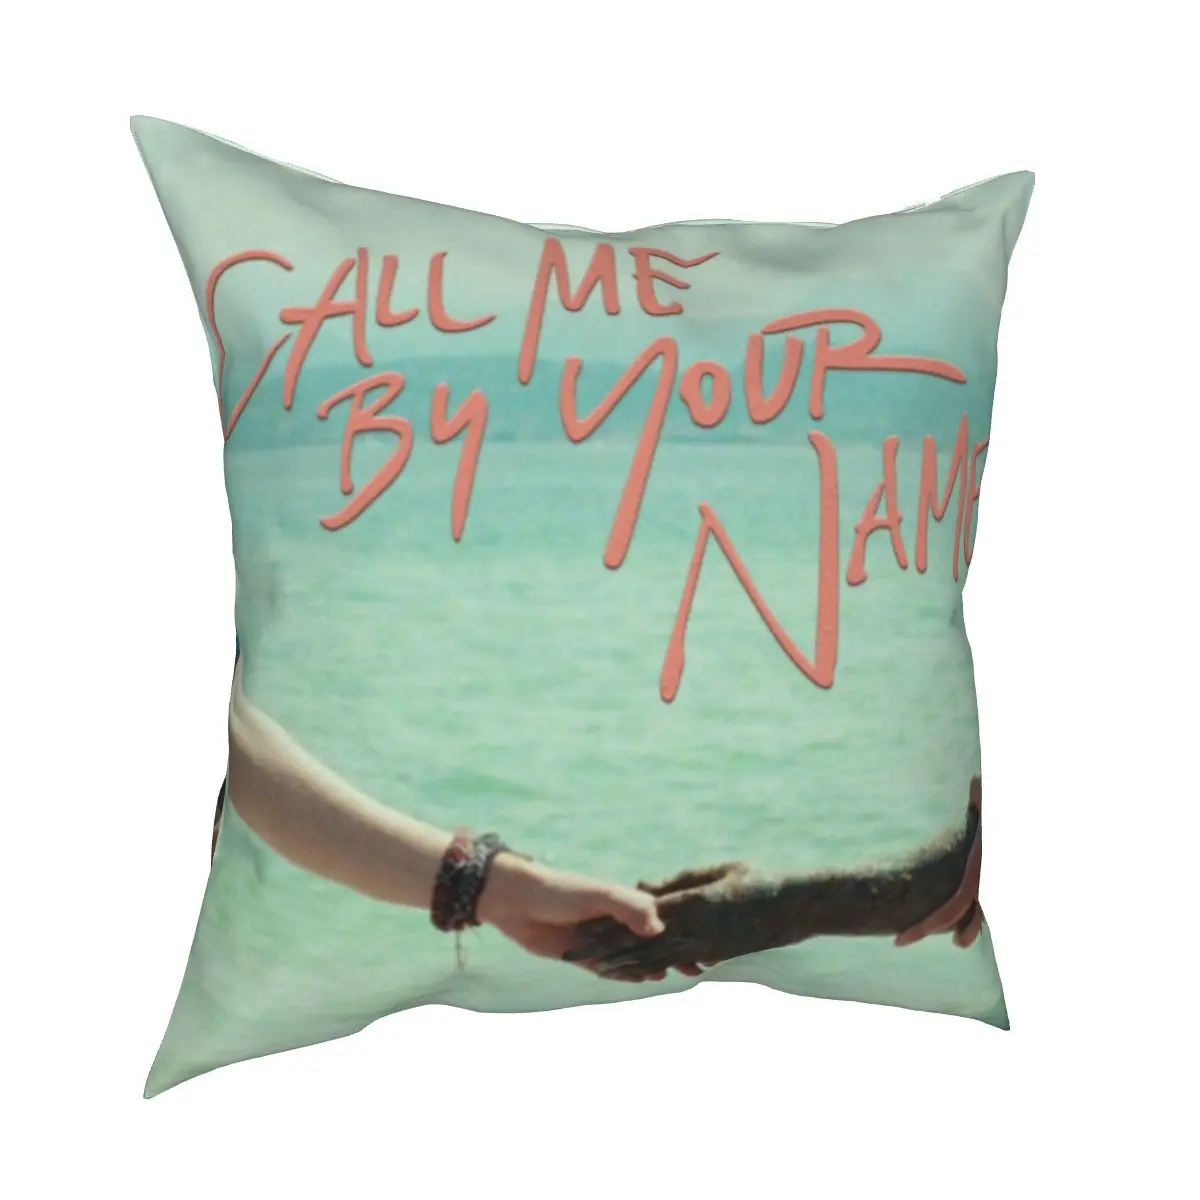 

Call Me By Your Name Pillowcase Cushion Cover Decorative Elio Oliver Handshake CMBYN LGBT Throw Pillow Case Cover Home 45*45cm